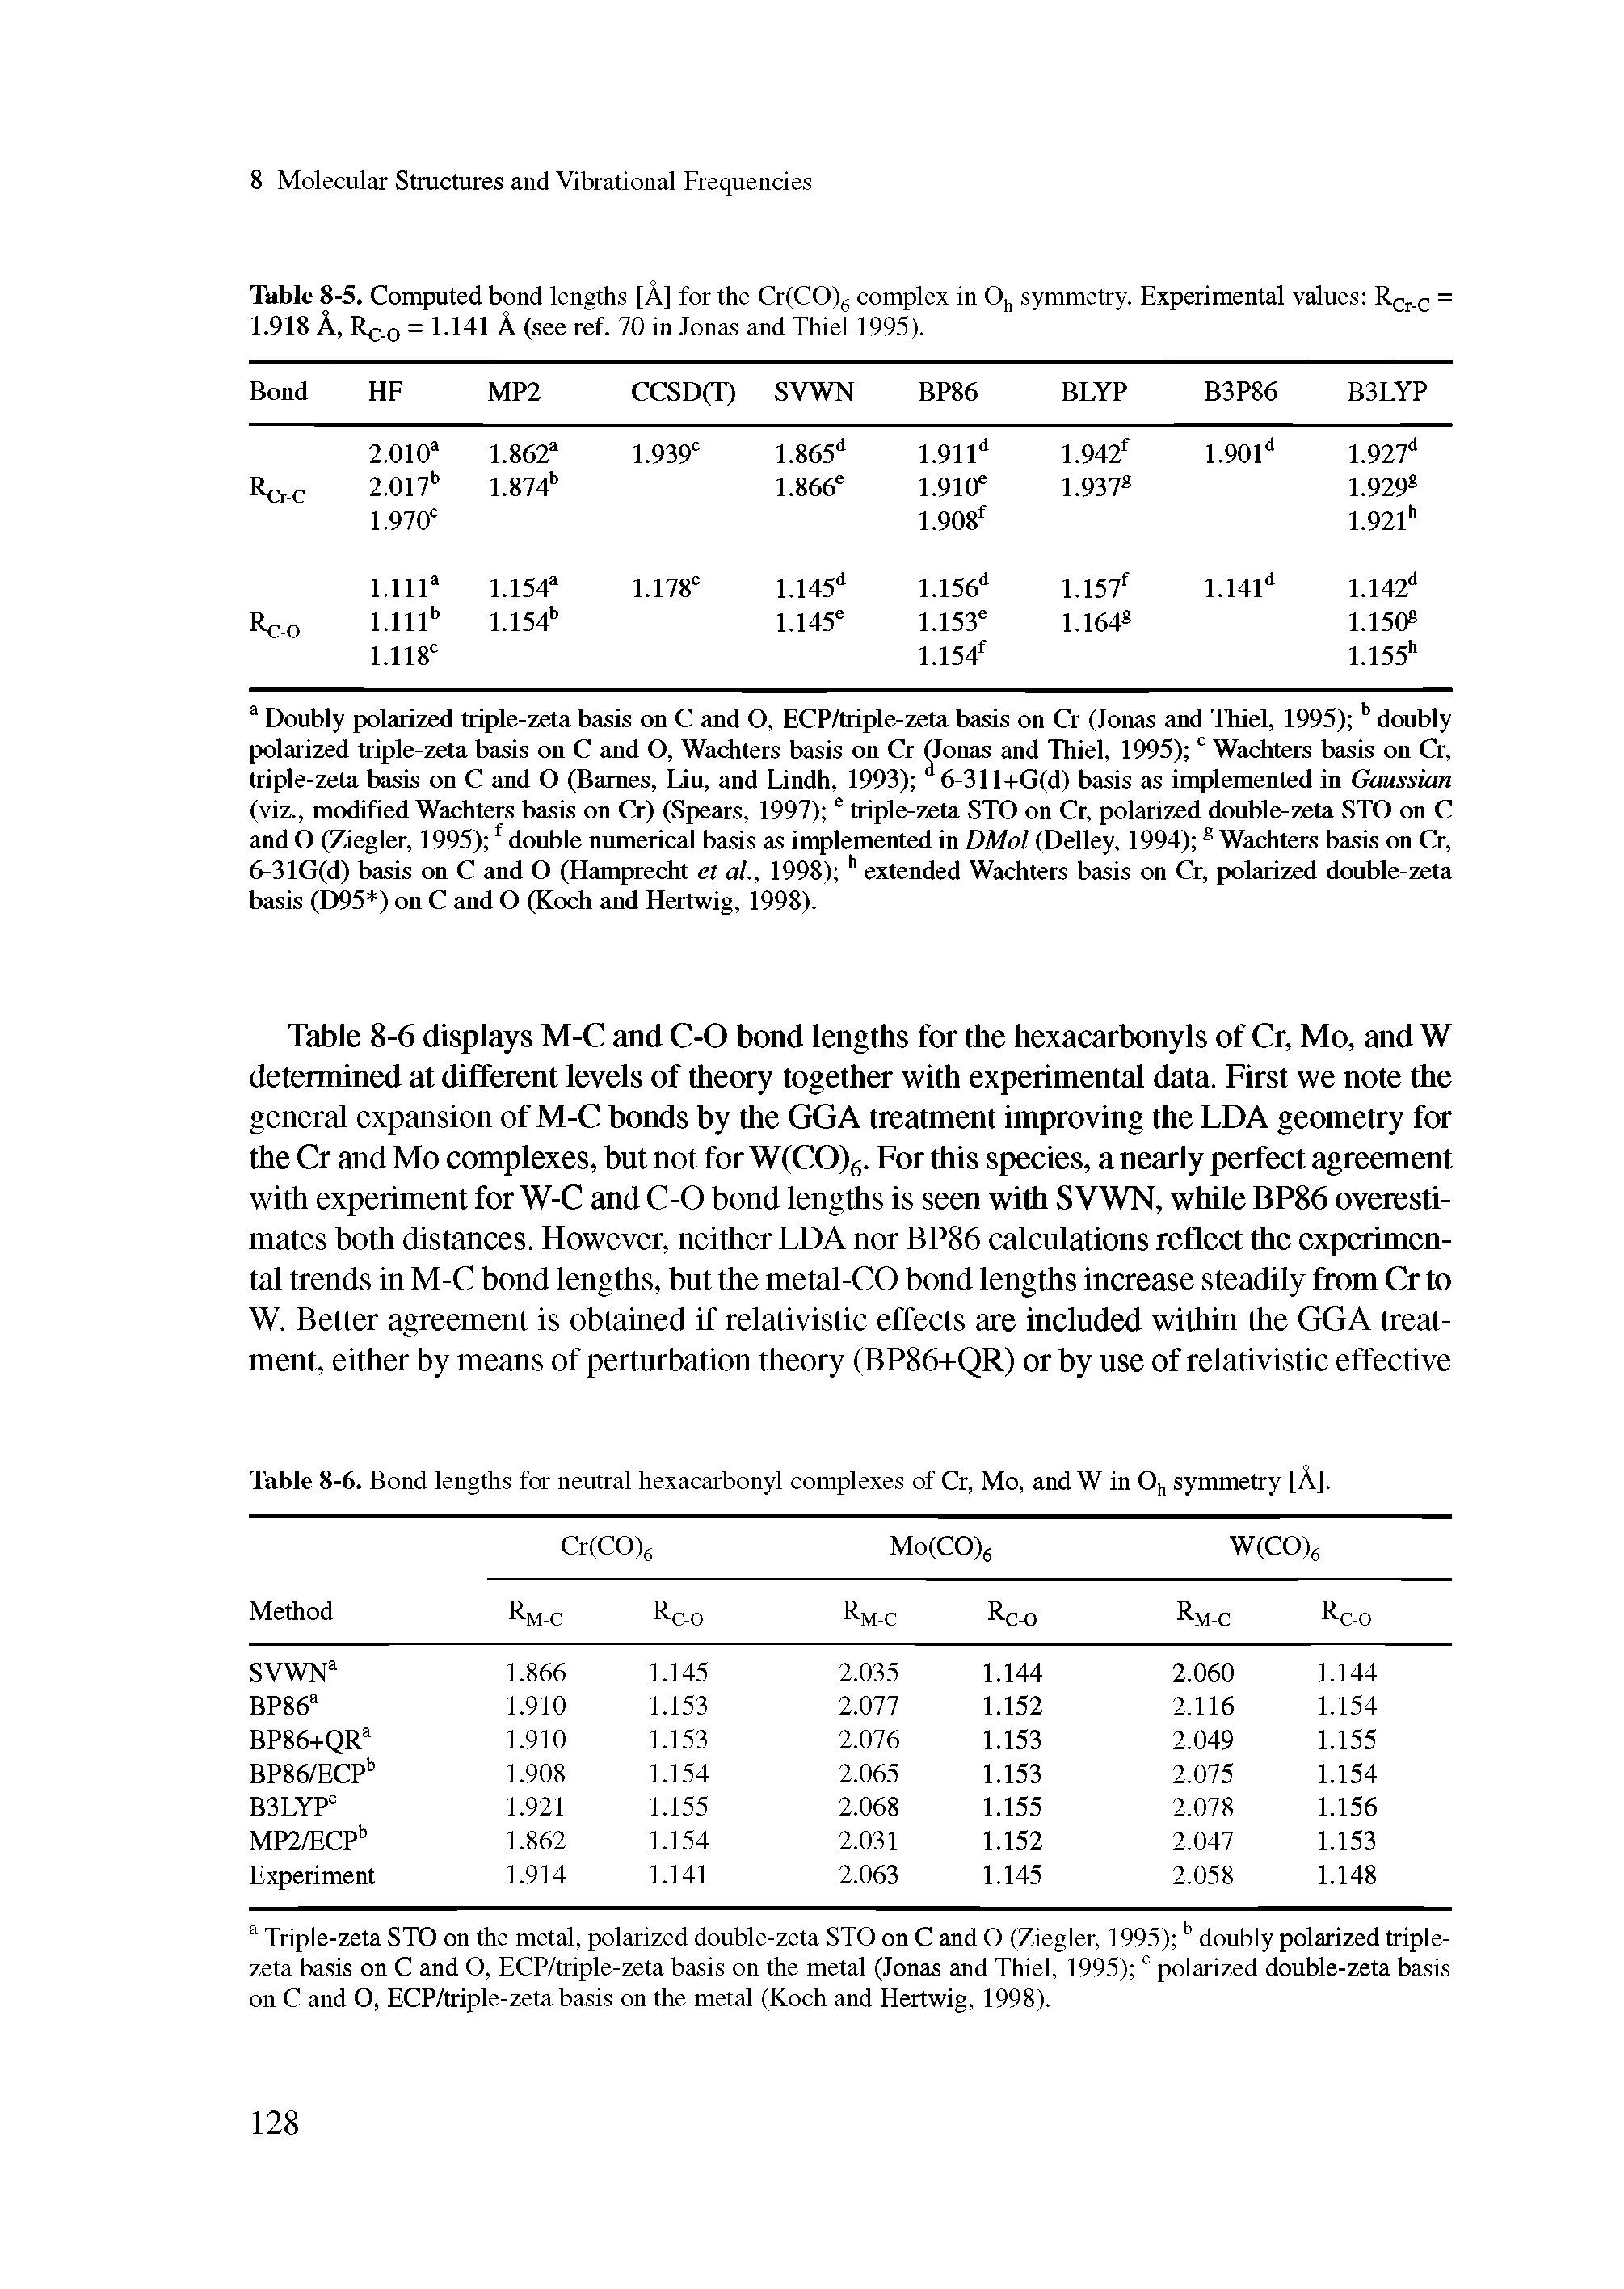 Table 8-6. Bond lengths for neutral hexacarbonyl complexes of Cr, Mo, and W in Oh symmetry [A],...